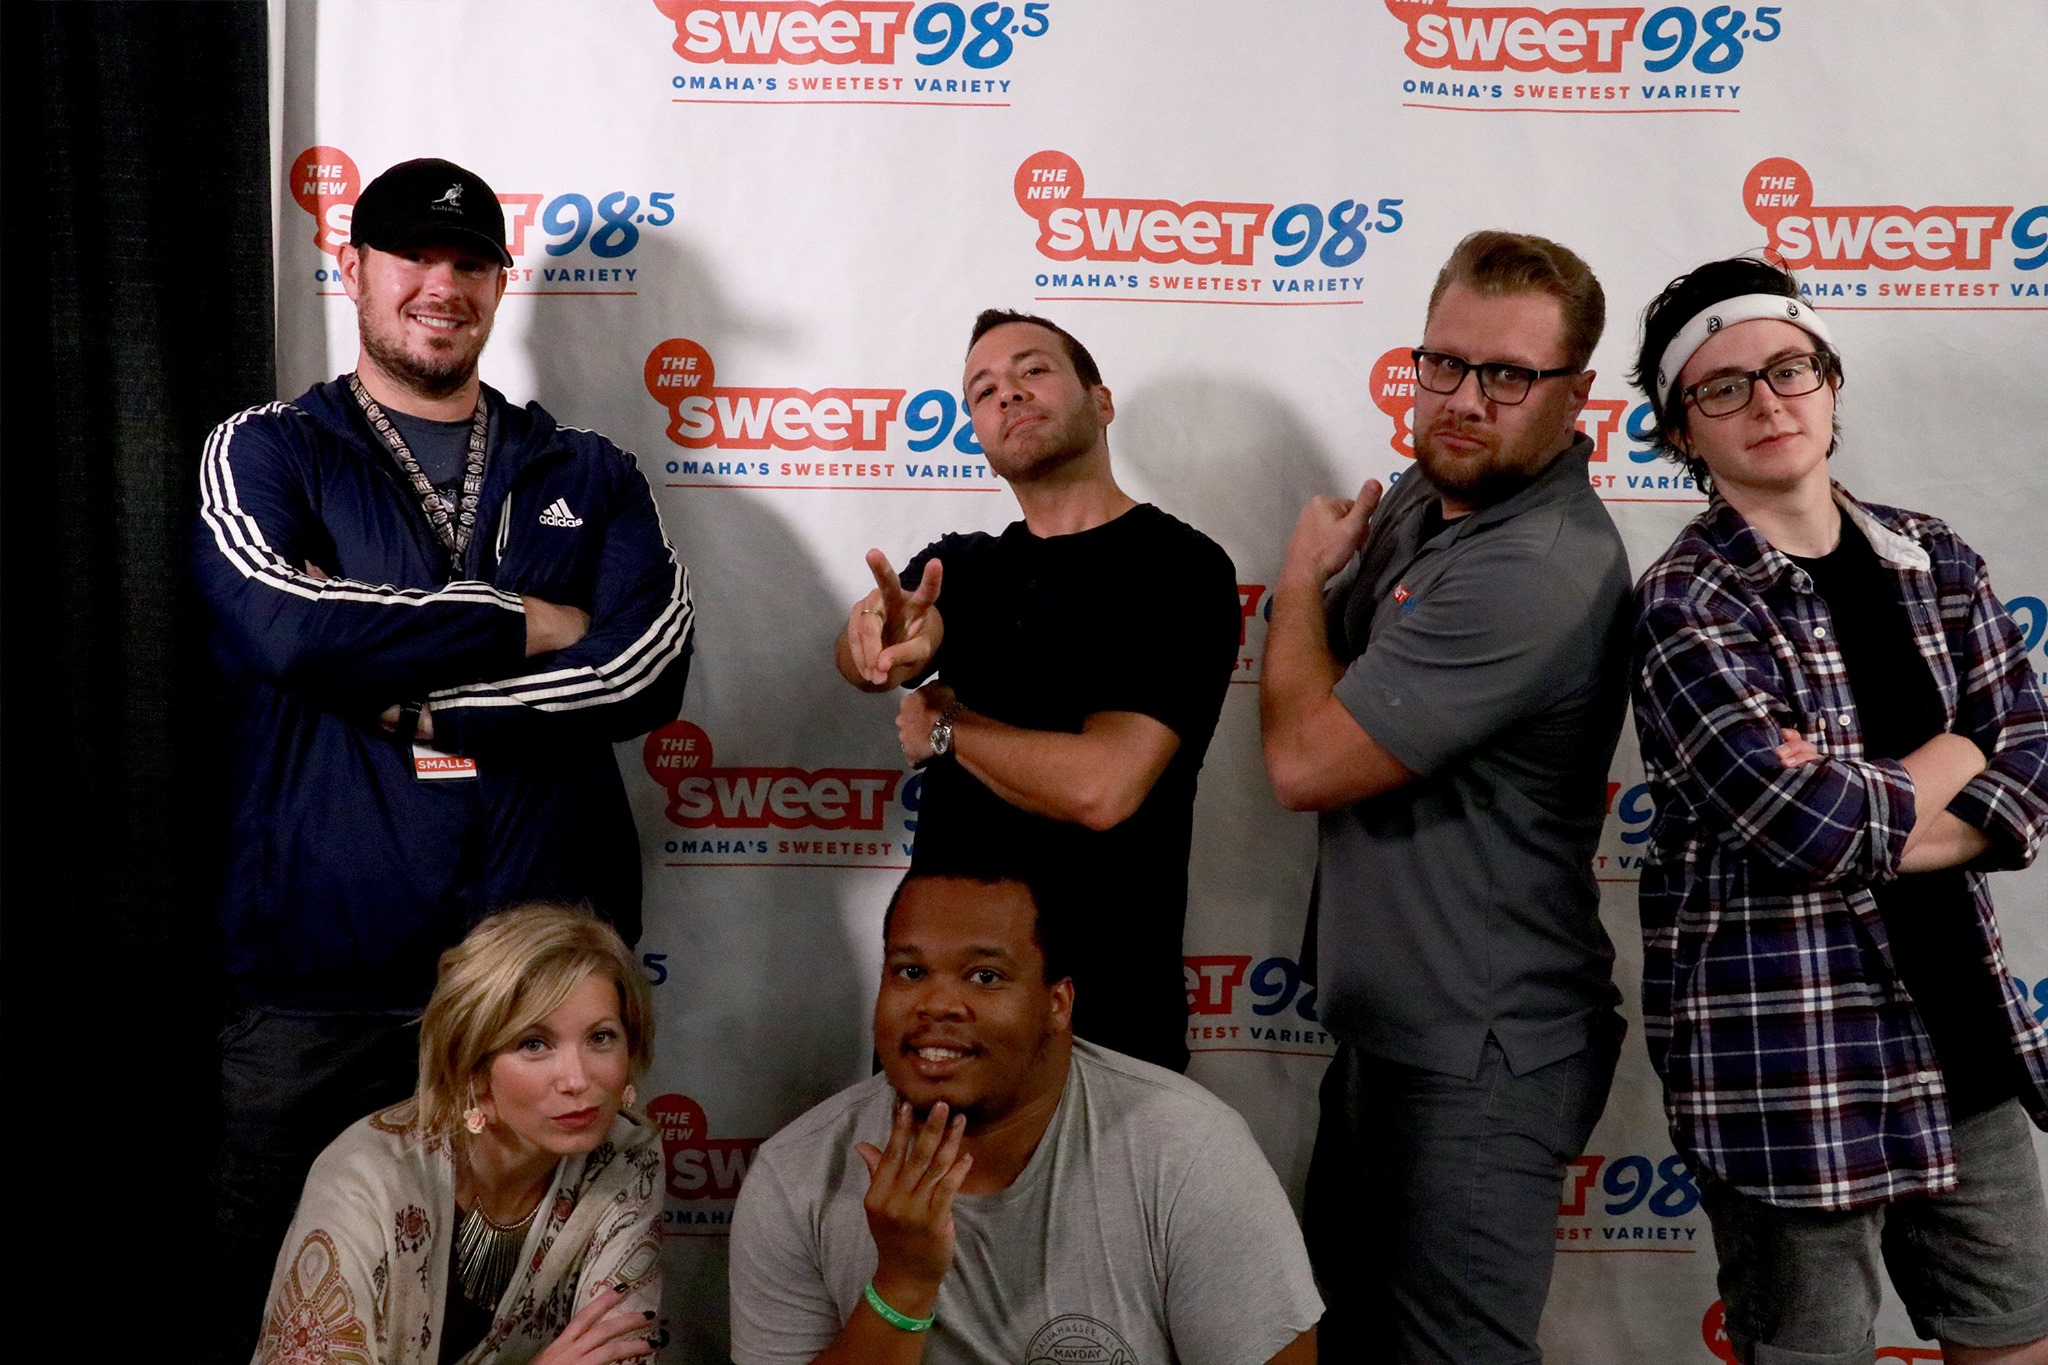 Photo Meet & Greet with Howie D at Sweet 98.5